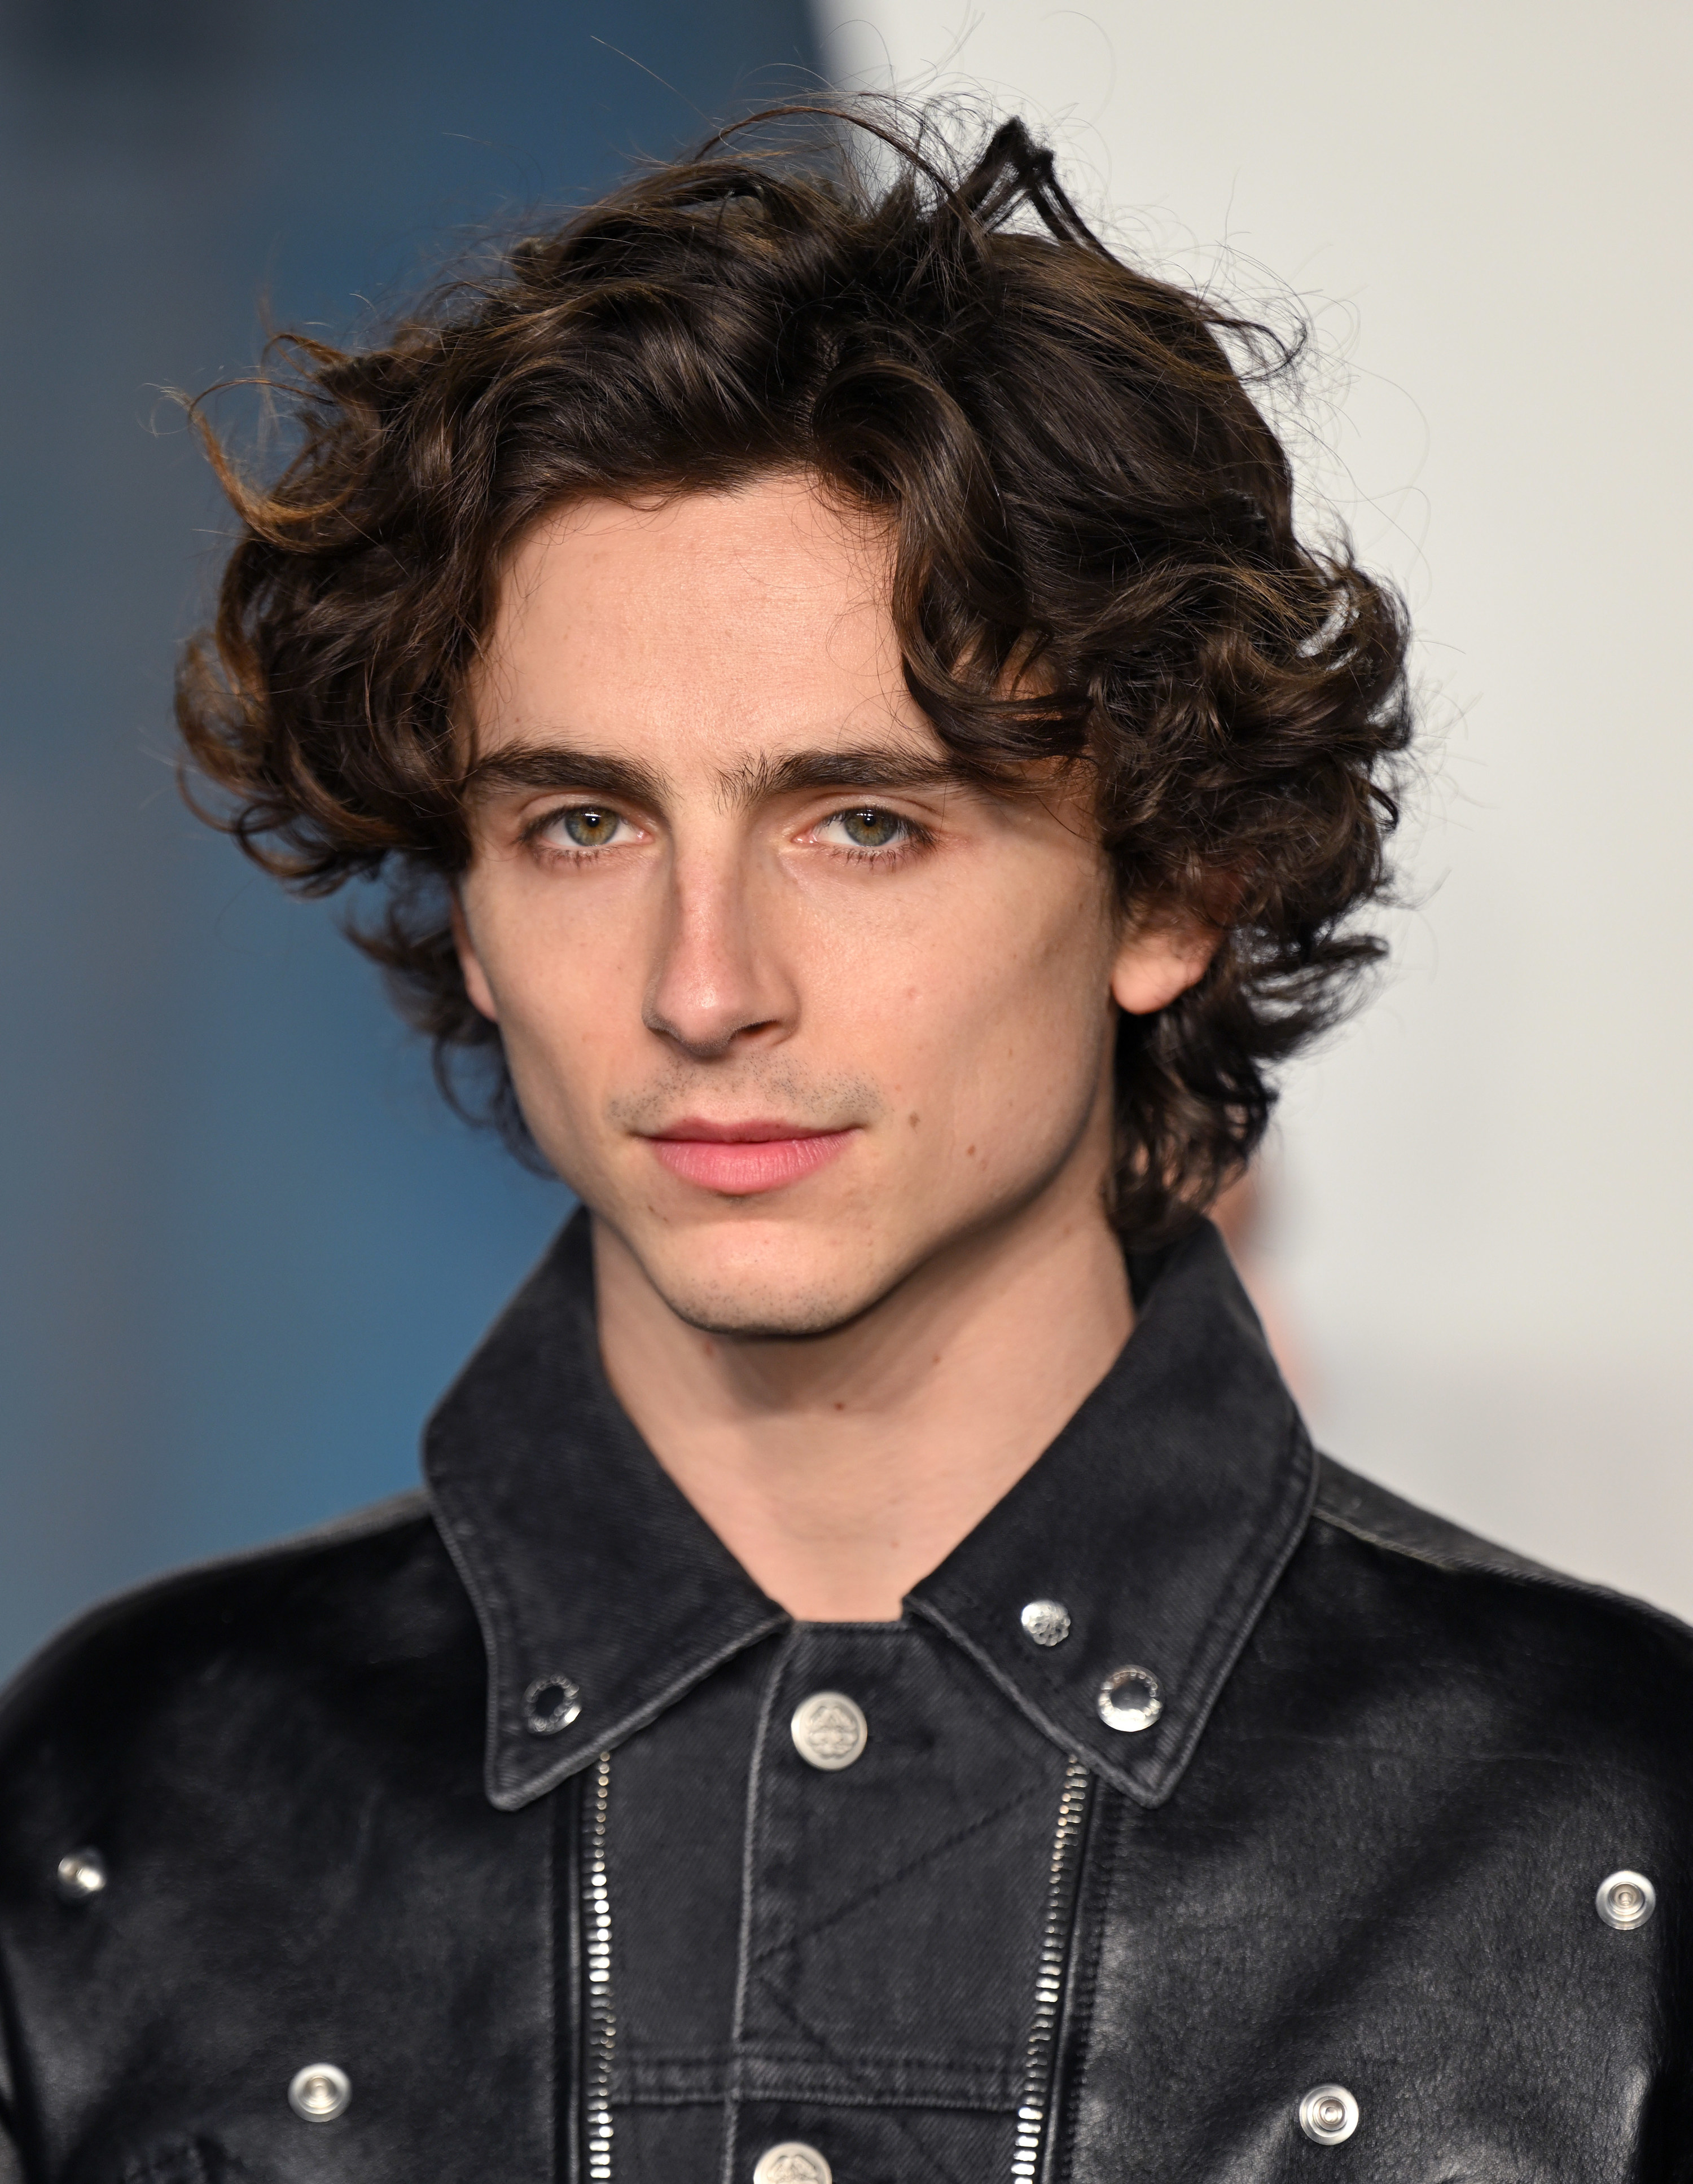 Timothee Chalamet attends the 2022 Vanity Fair Oscar Party Hosted By Radhika Jones